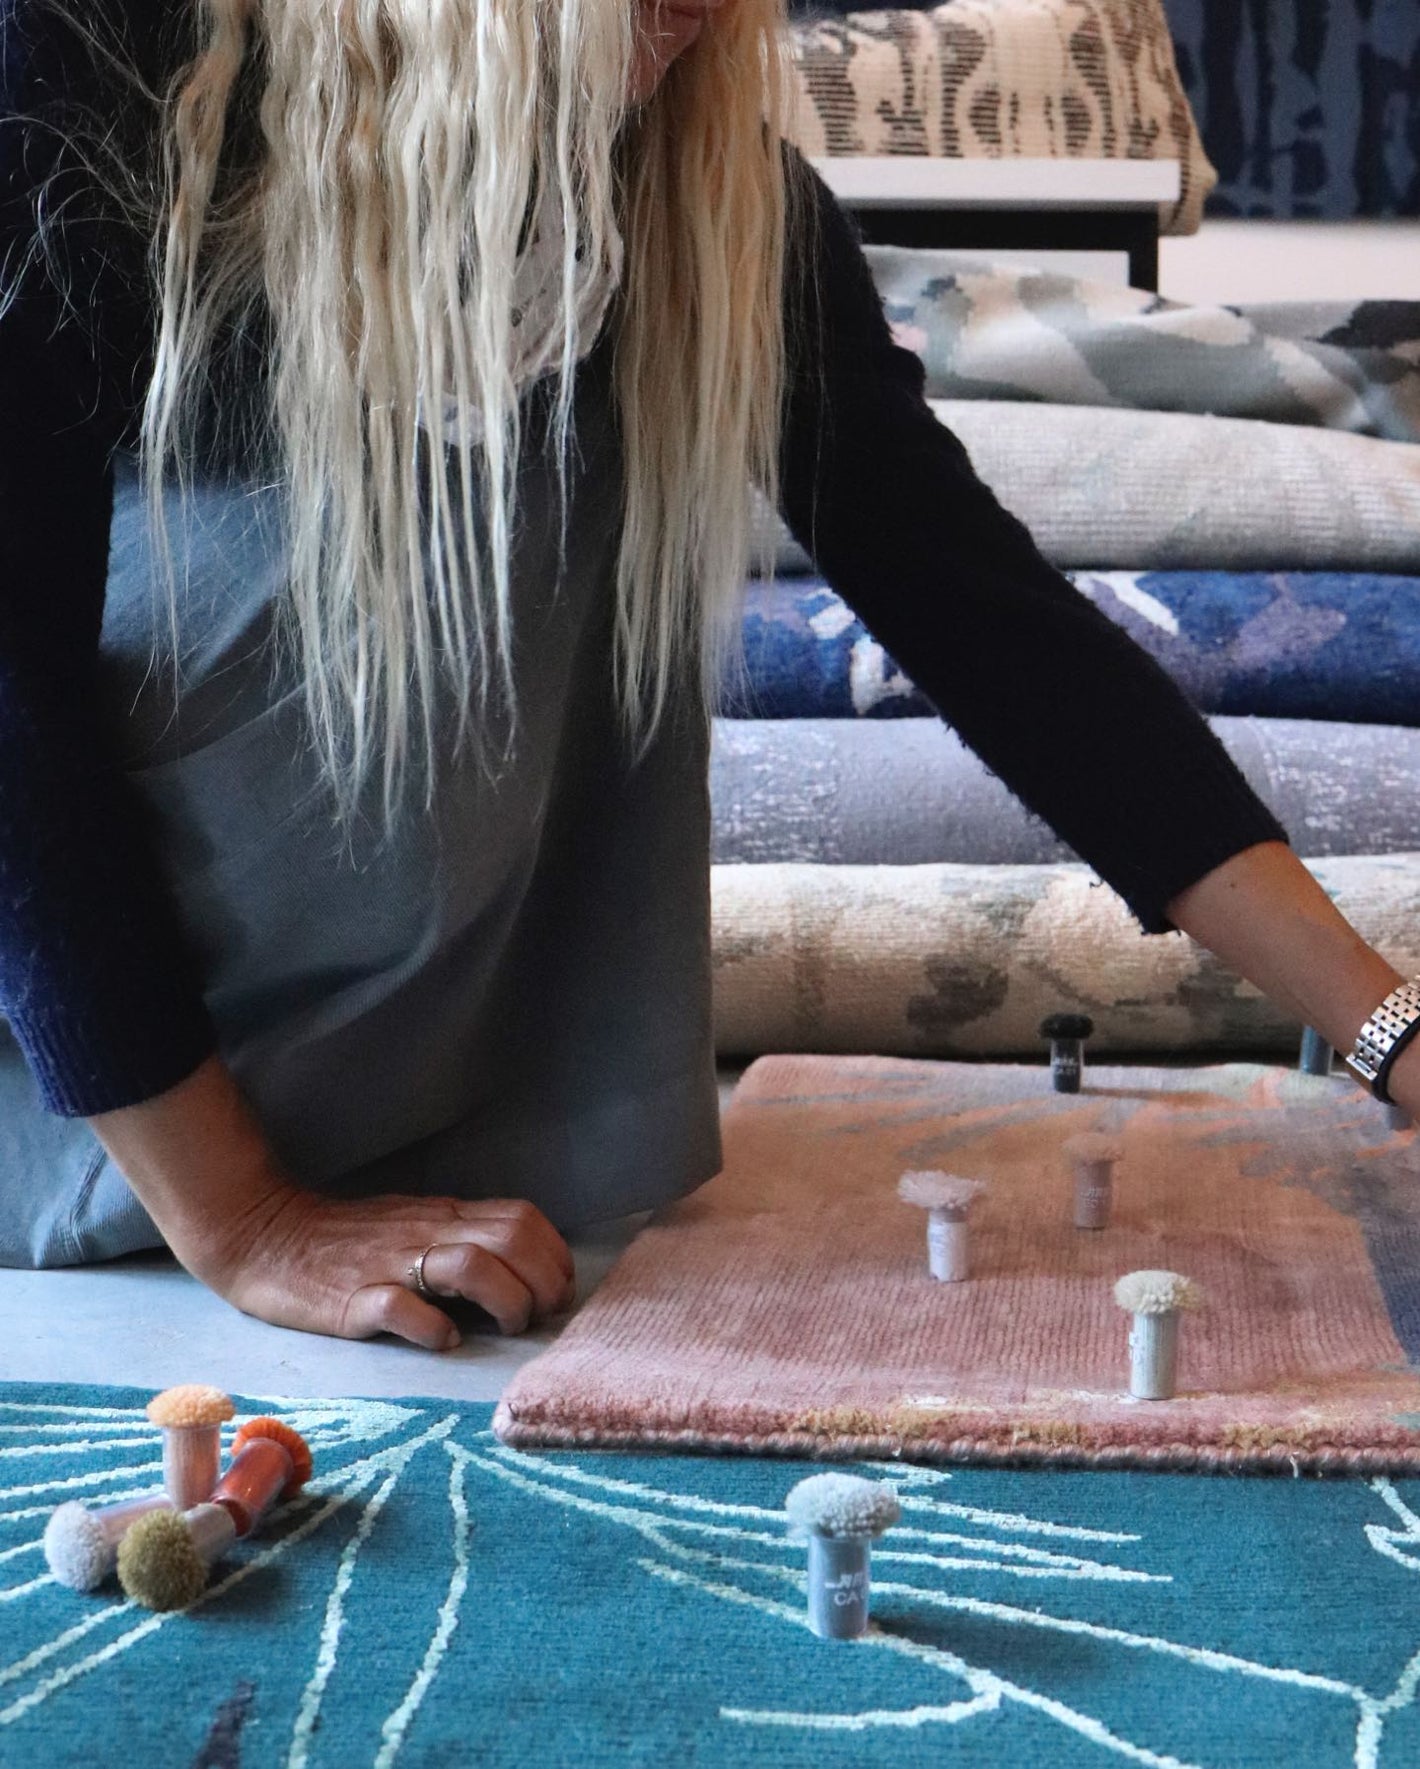 A woman is working on a rug in a store